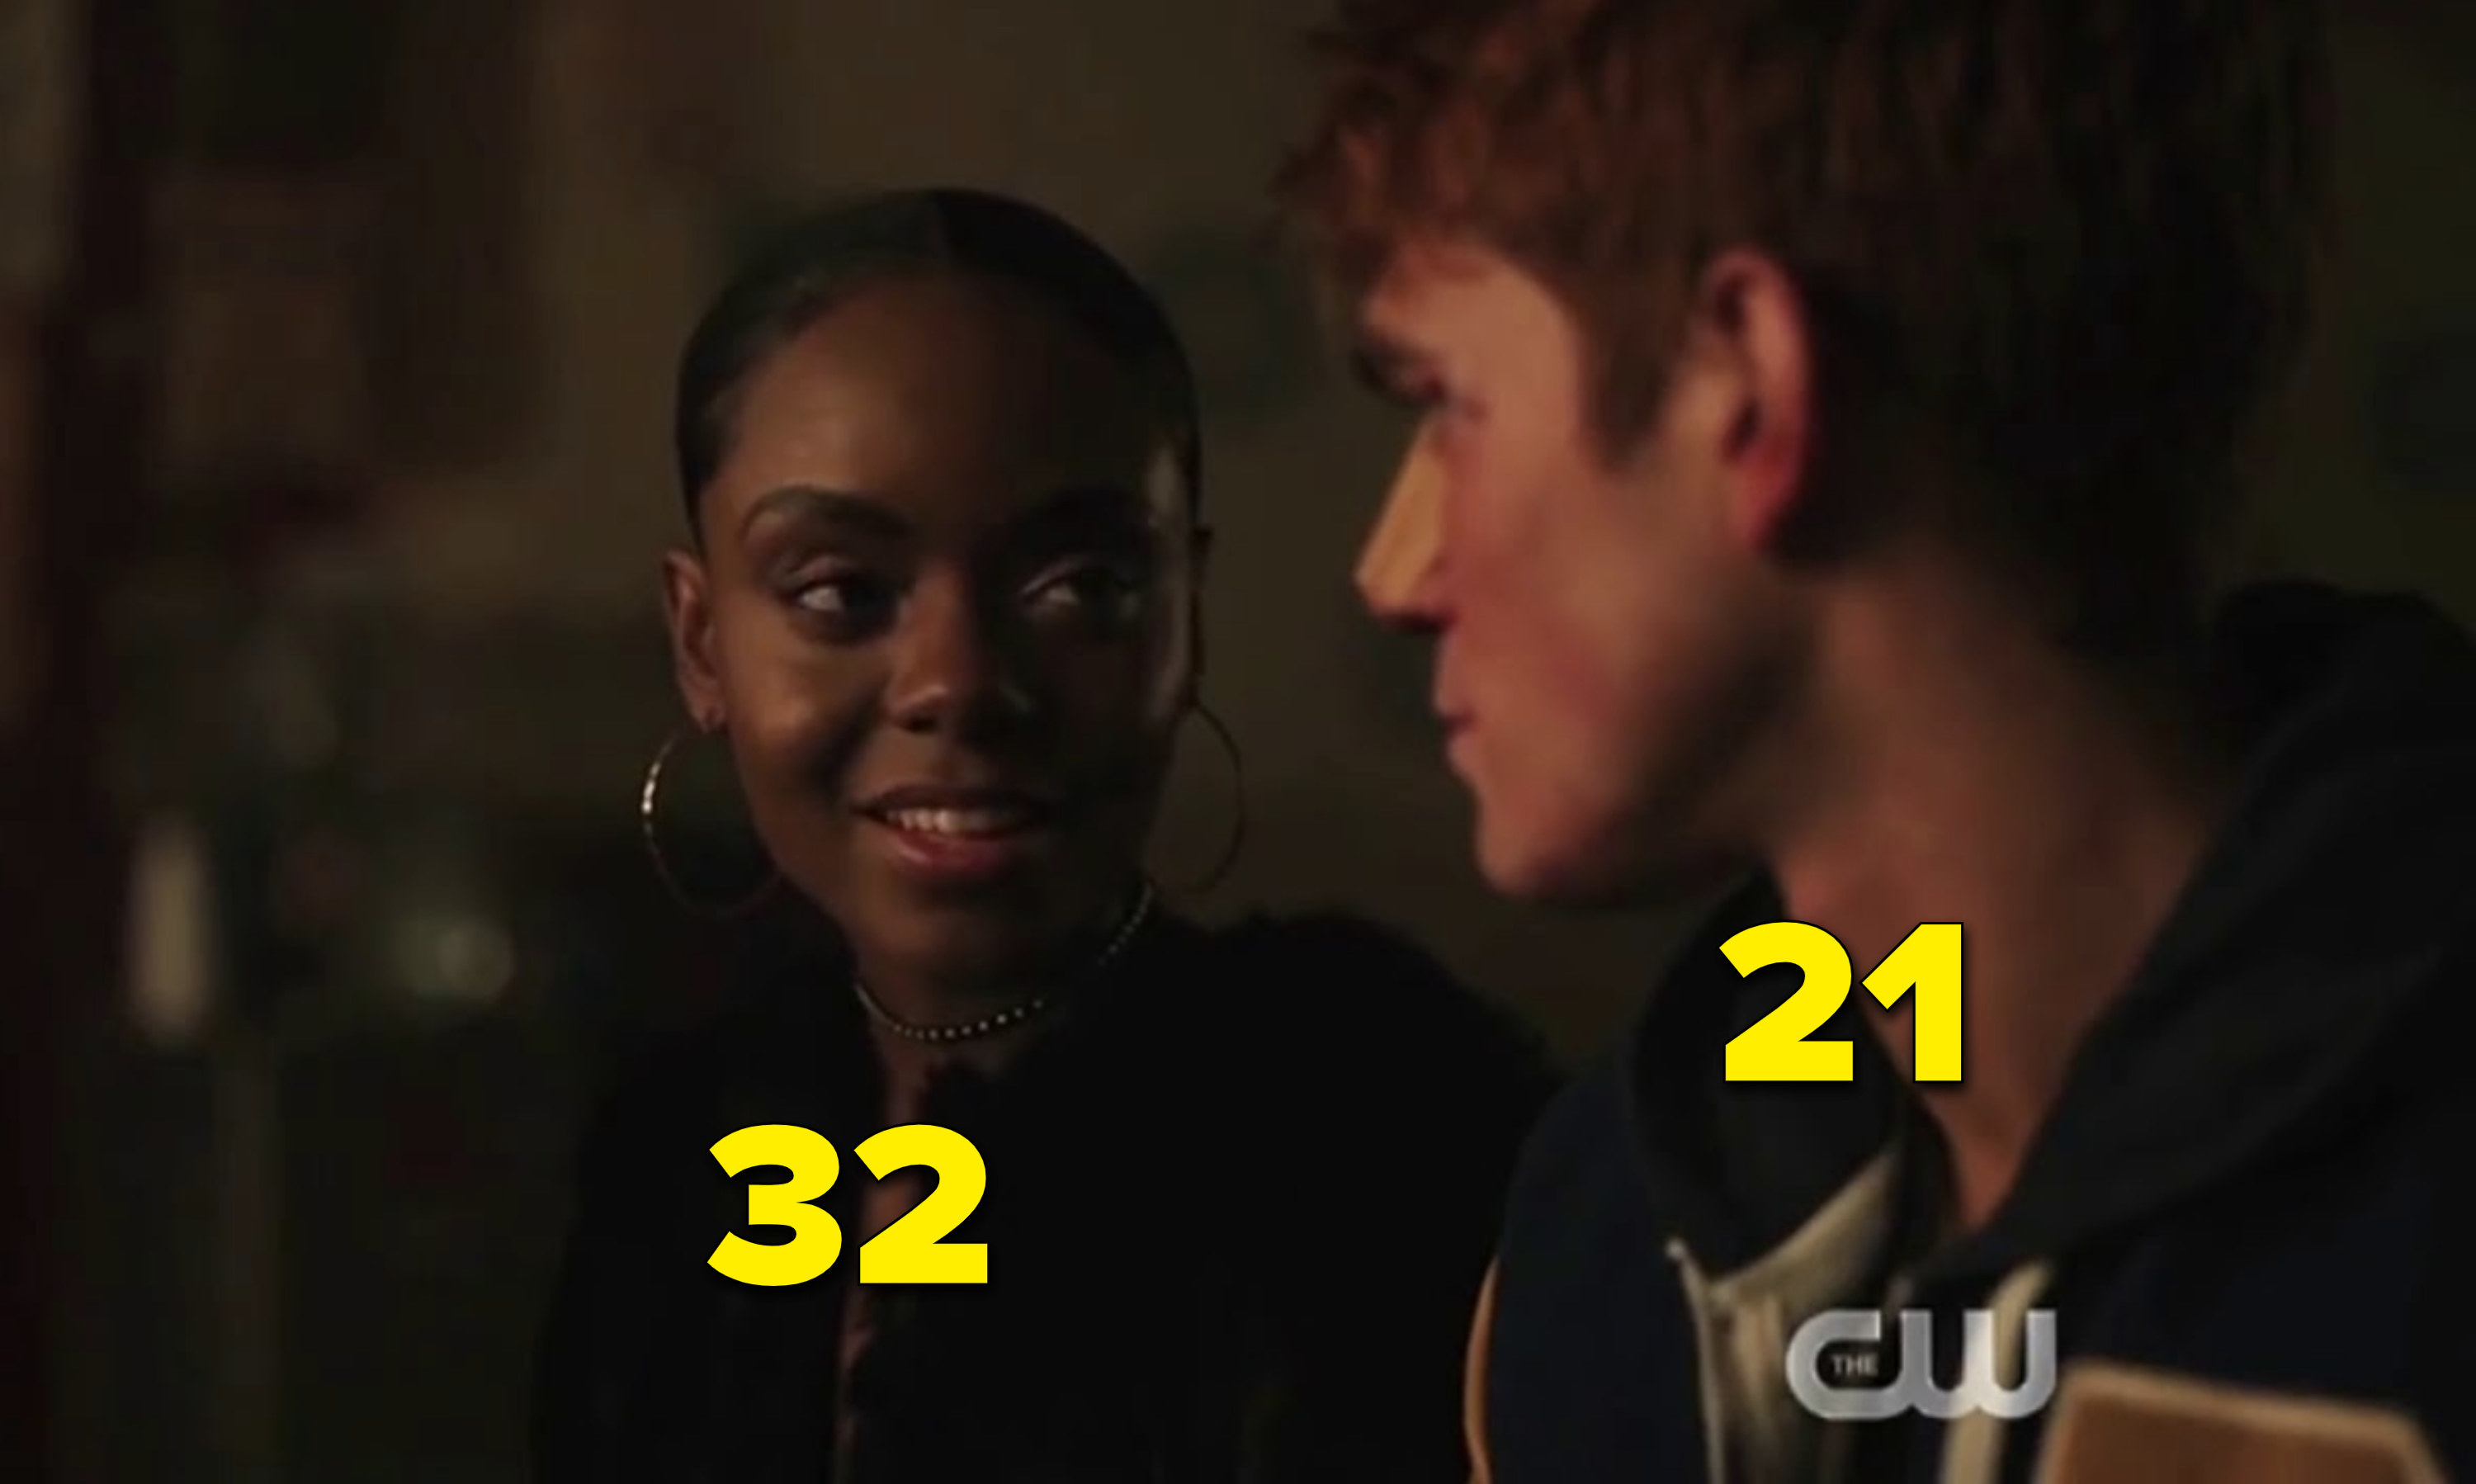 Ashleigh with &quot;32&quot; caption  and KJ Apa with &quot;21&quot; caption